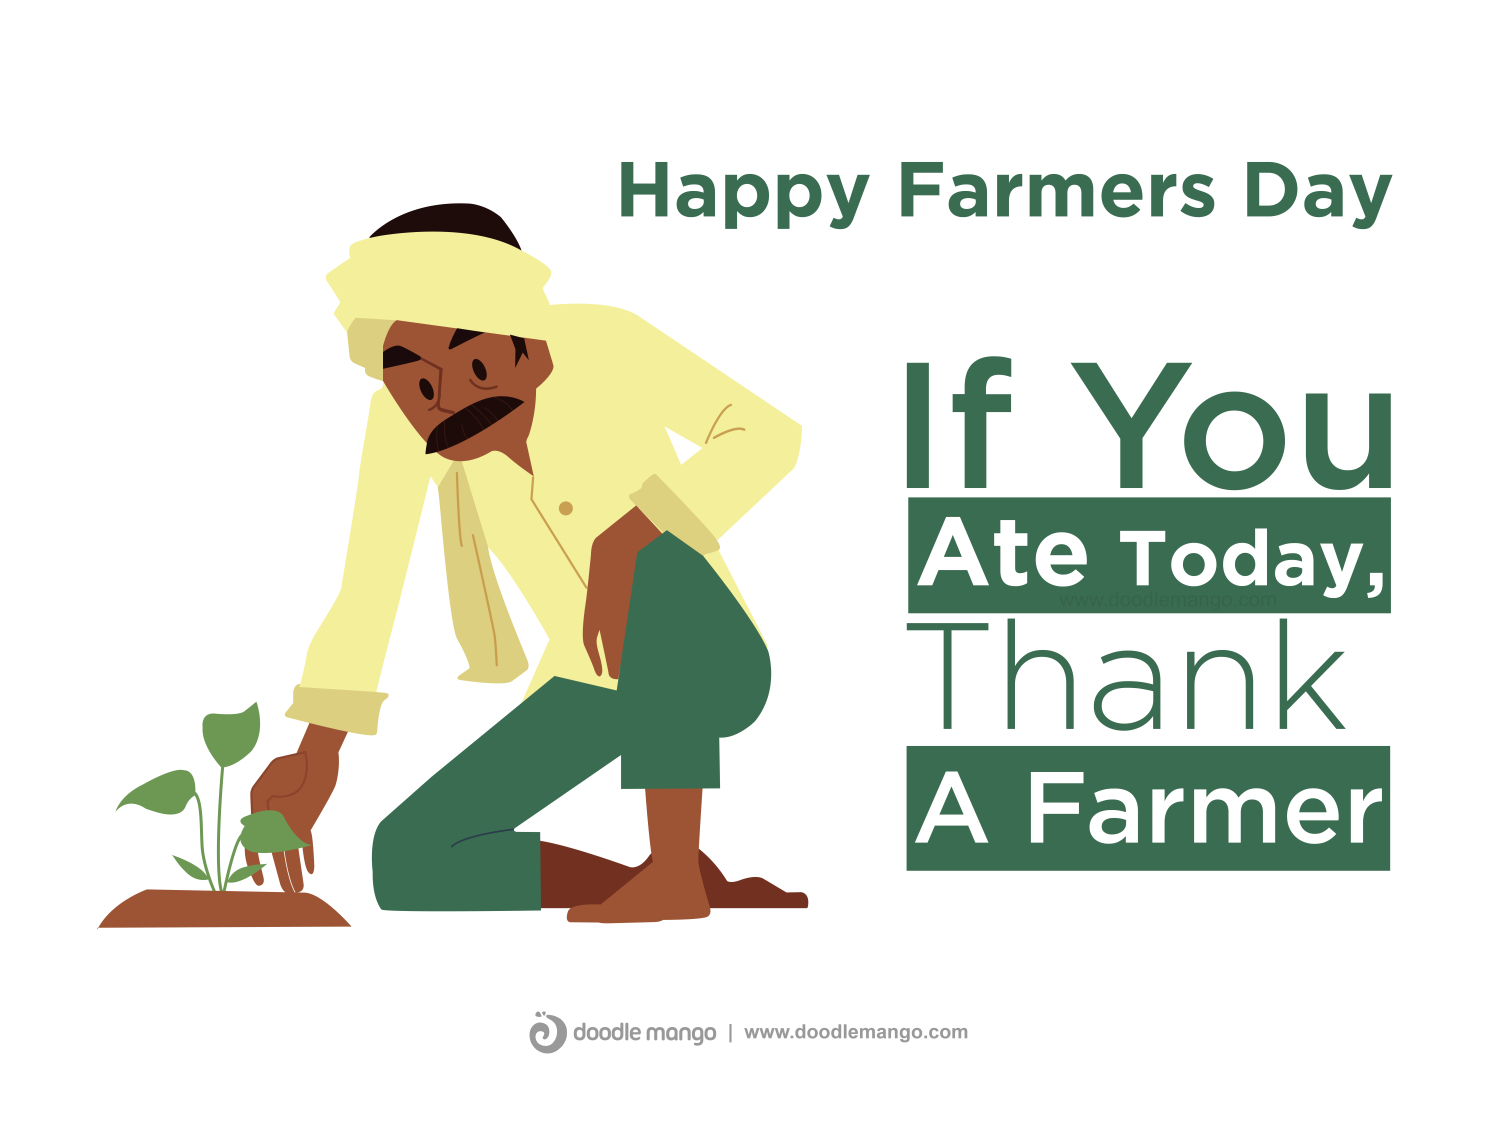 Happy National Farmer's Day by Doodle Mango on Dribbble